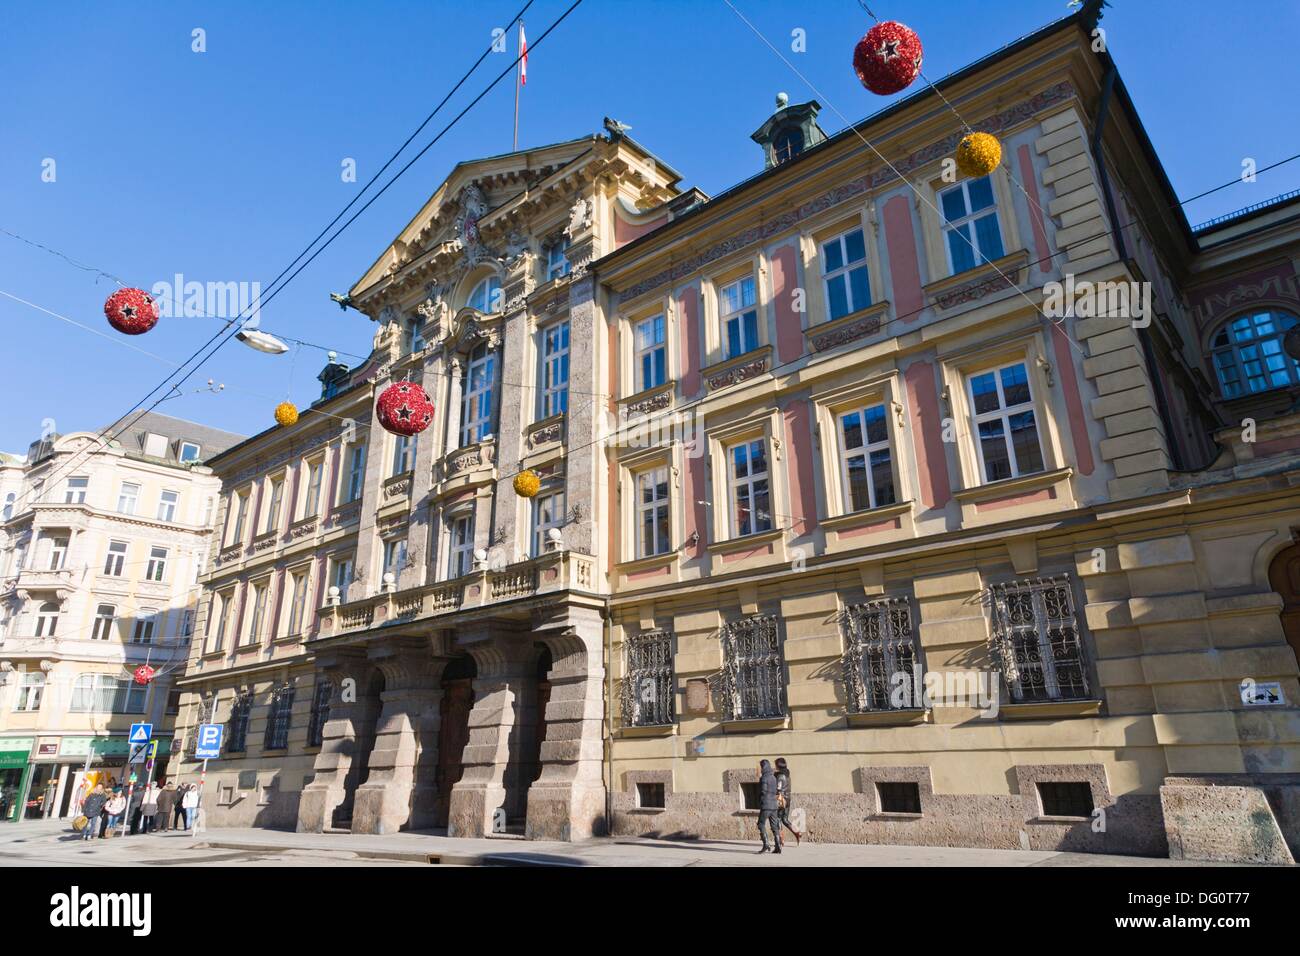 Altes Landhaus, Old federal state parliament building, Maria Theresien Strasse, Innsbruck, Tyrol, Austria. Stock Photo